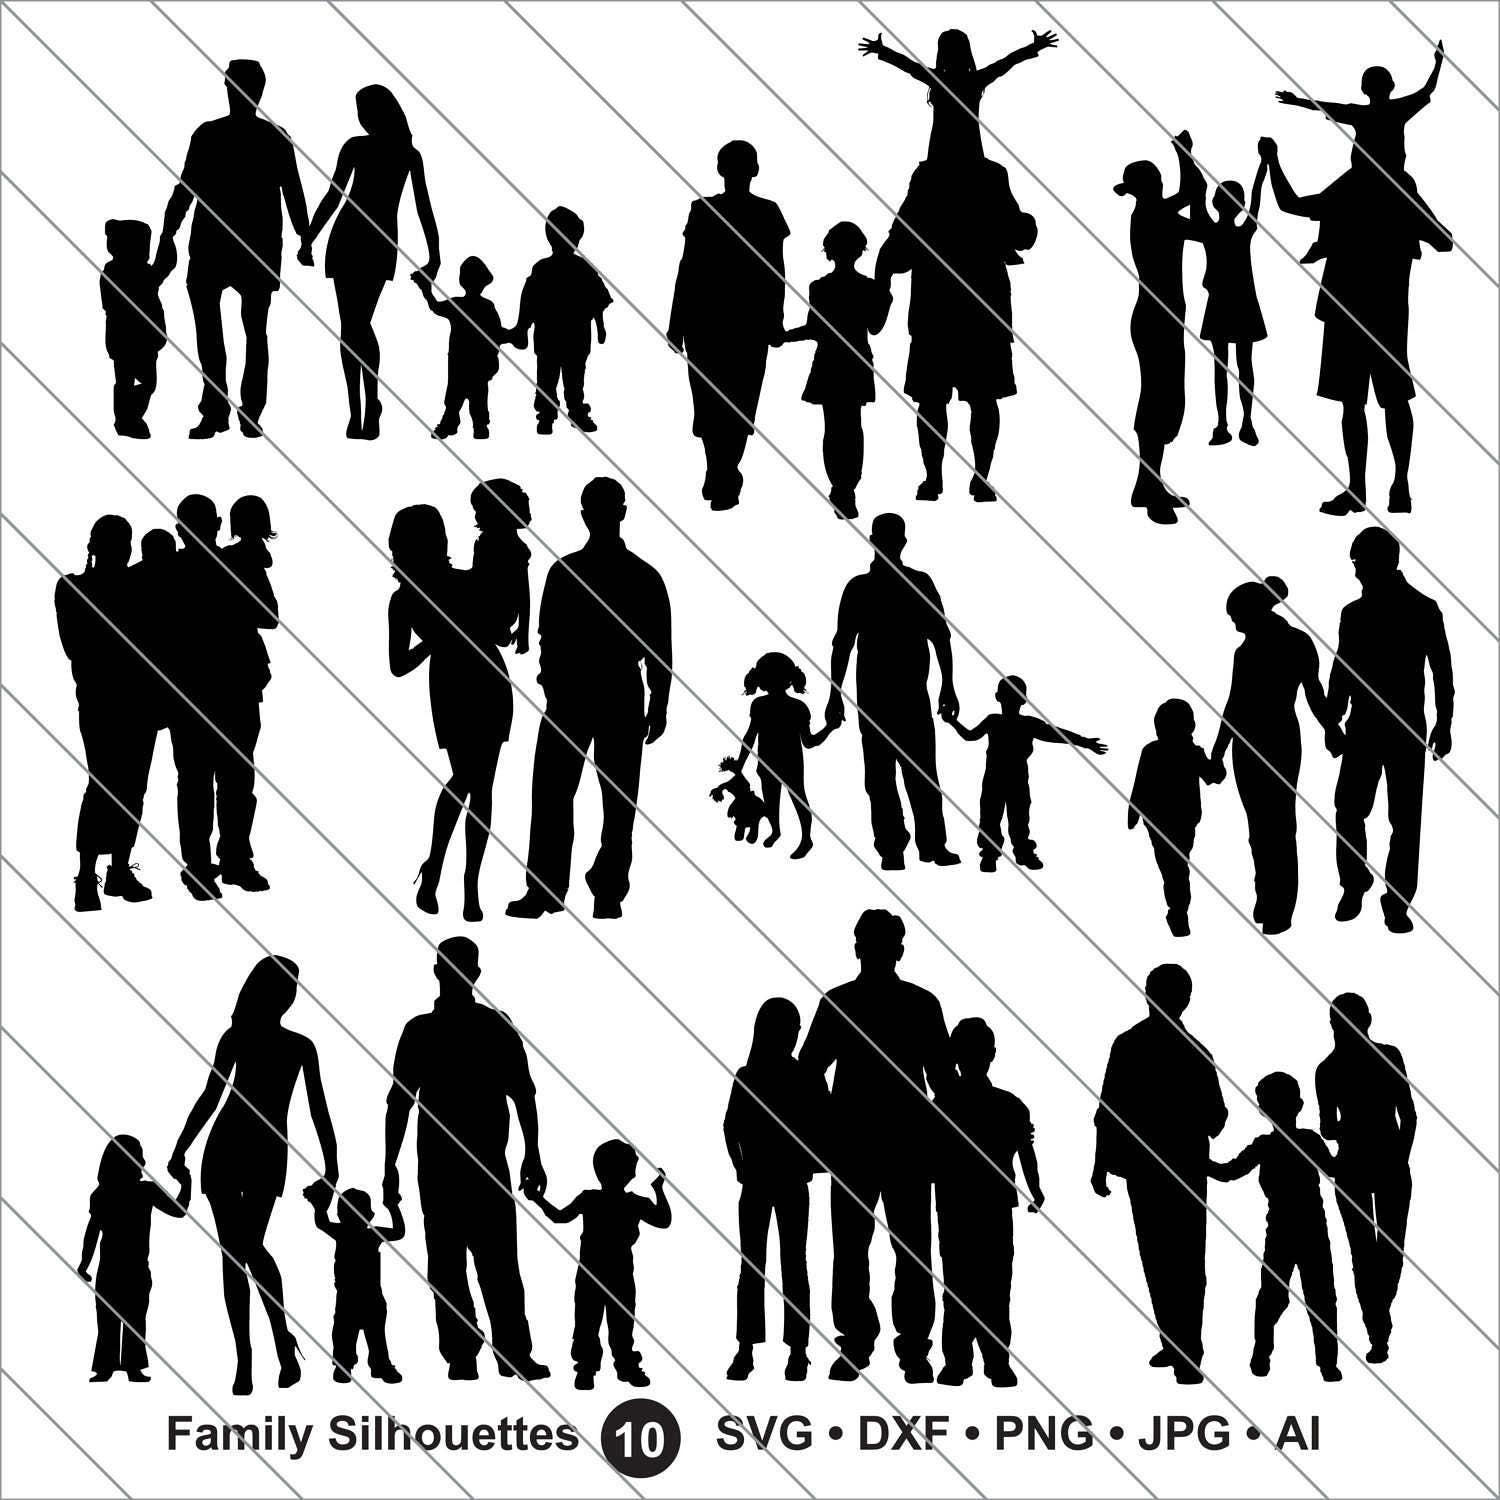 Download Family Silhouettes SVGfamily clipartpeople clipartFamily